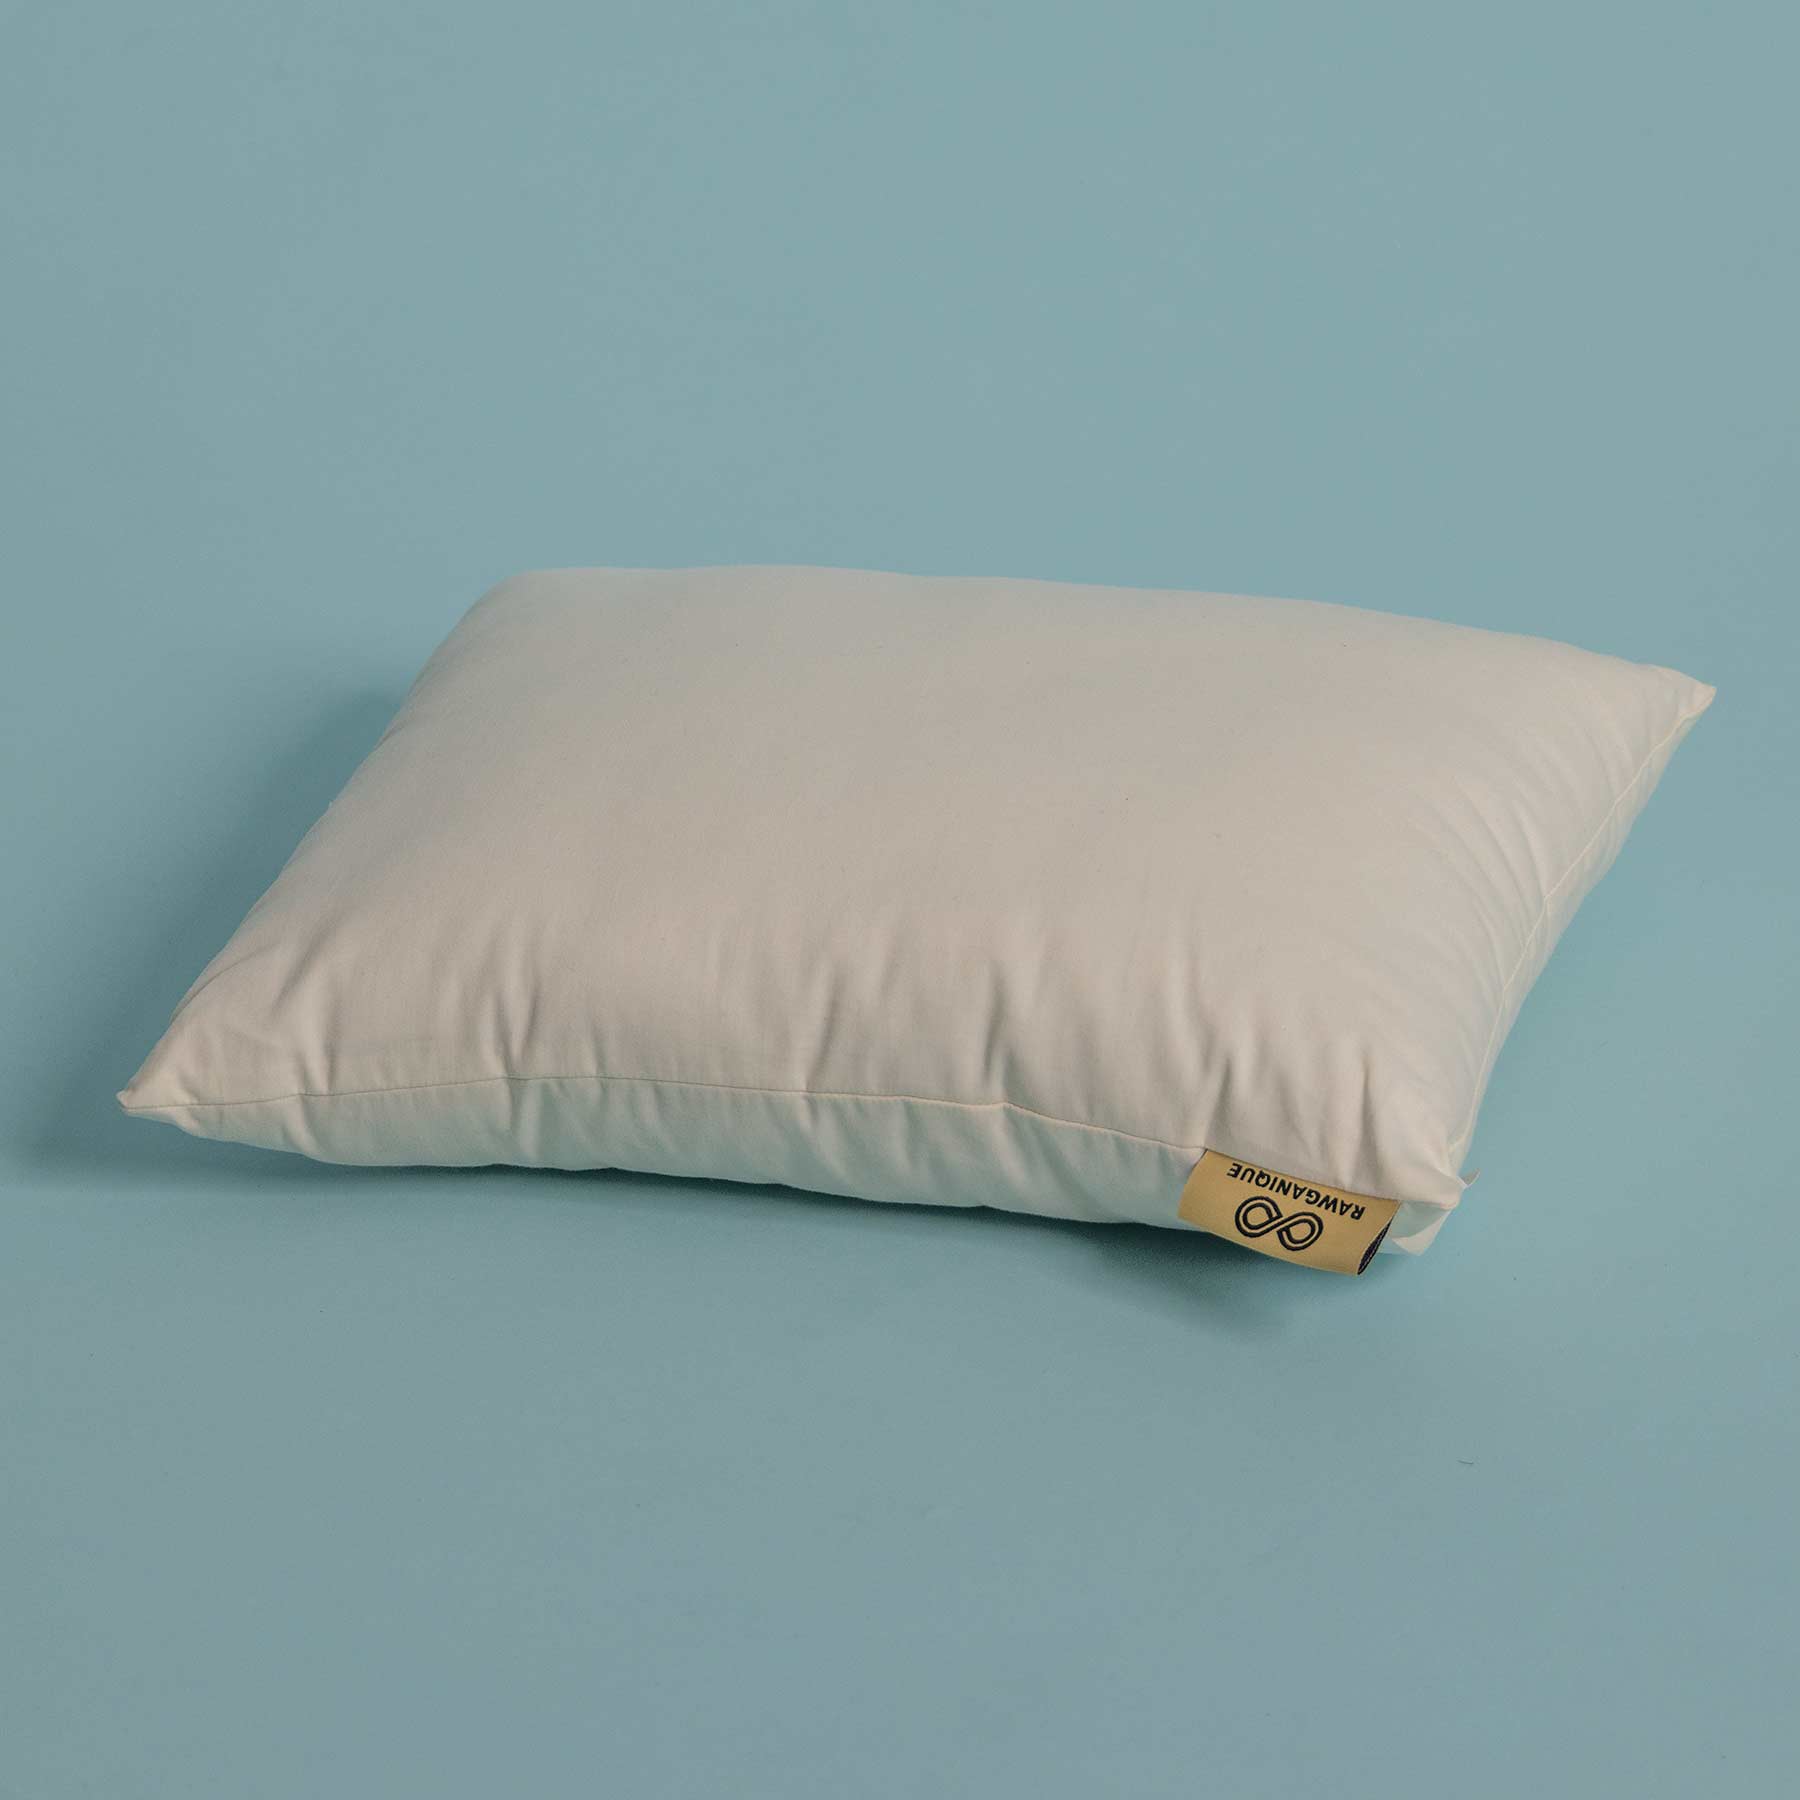 Neck Roll Organic Kapok Pillow - 6 inch x 16 inch - Organic Cotton Zippered Shell - Made in USA by Bean Products